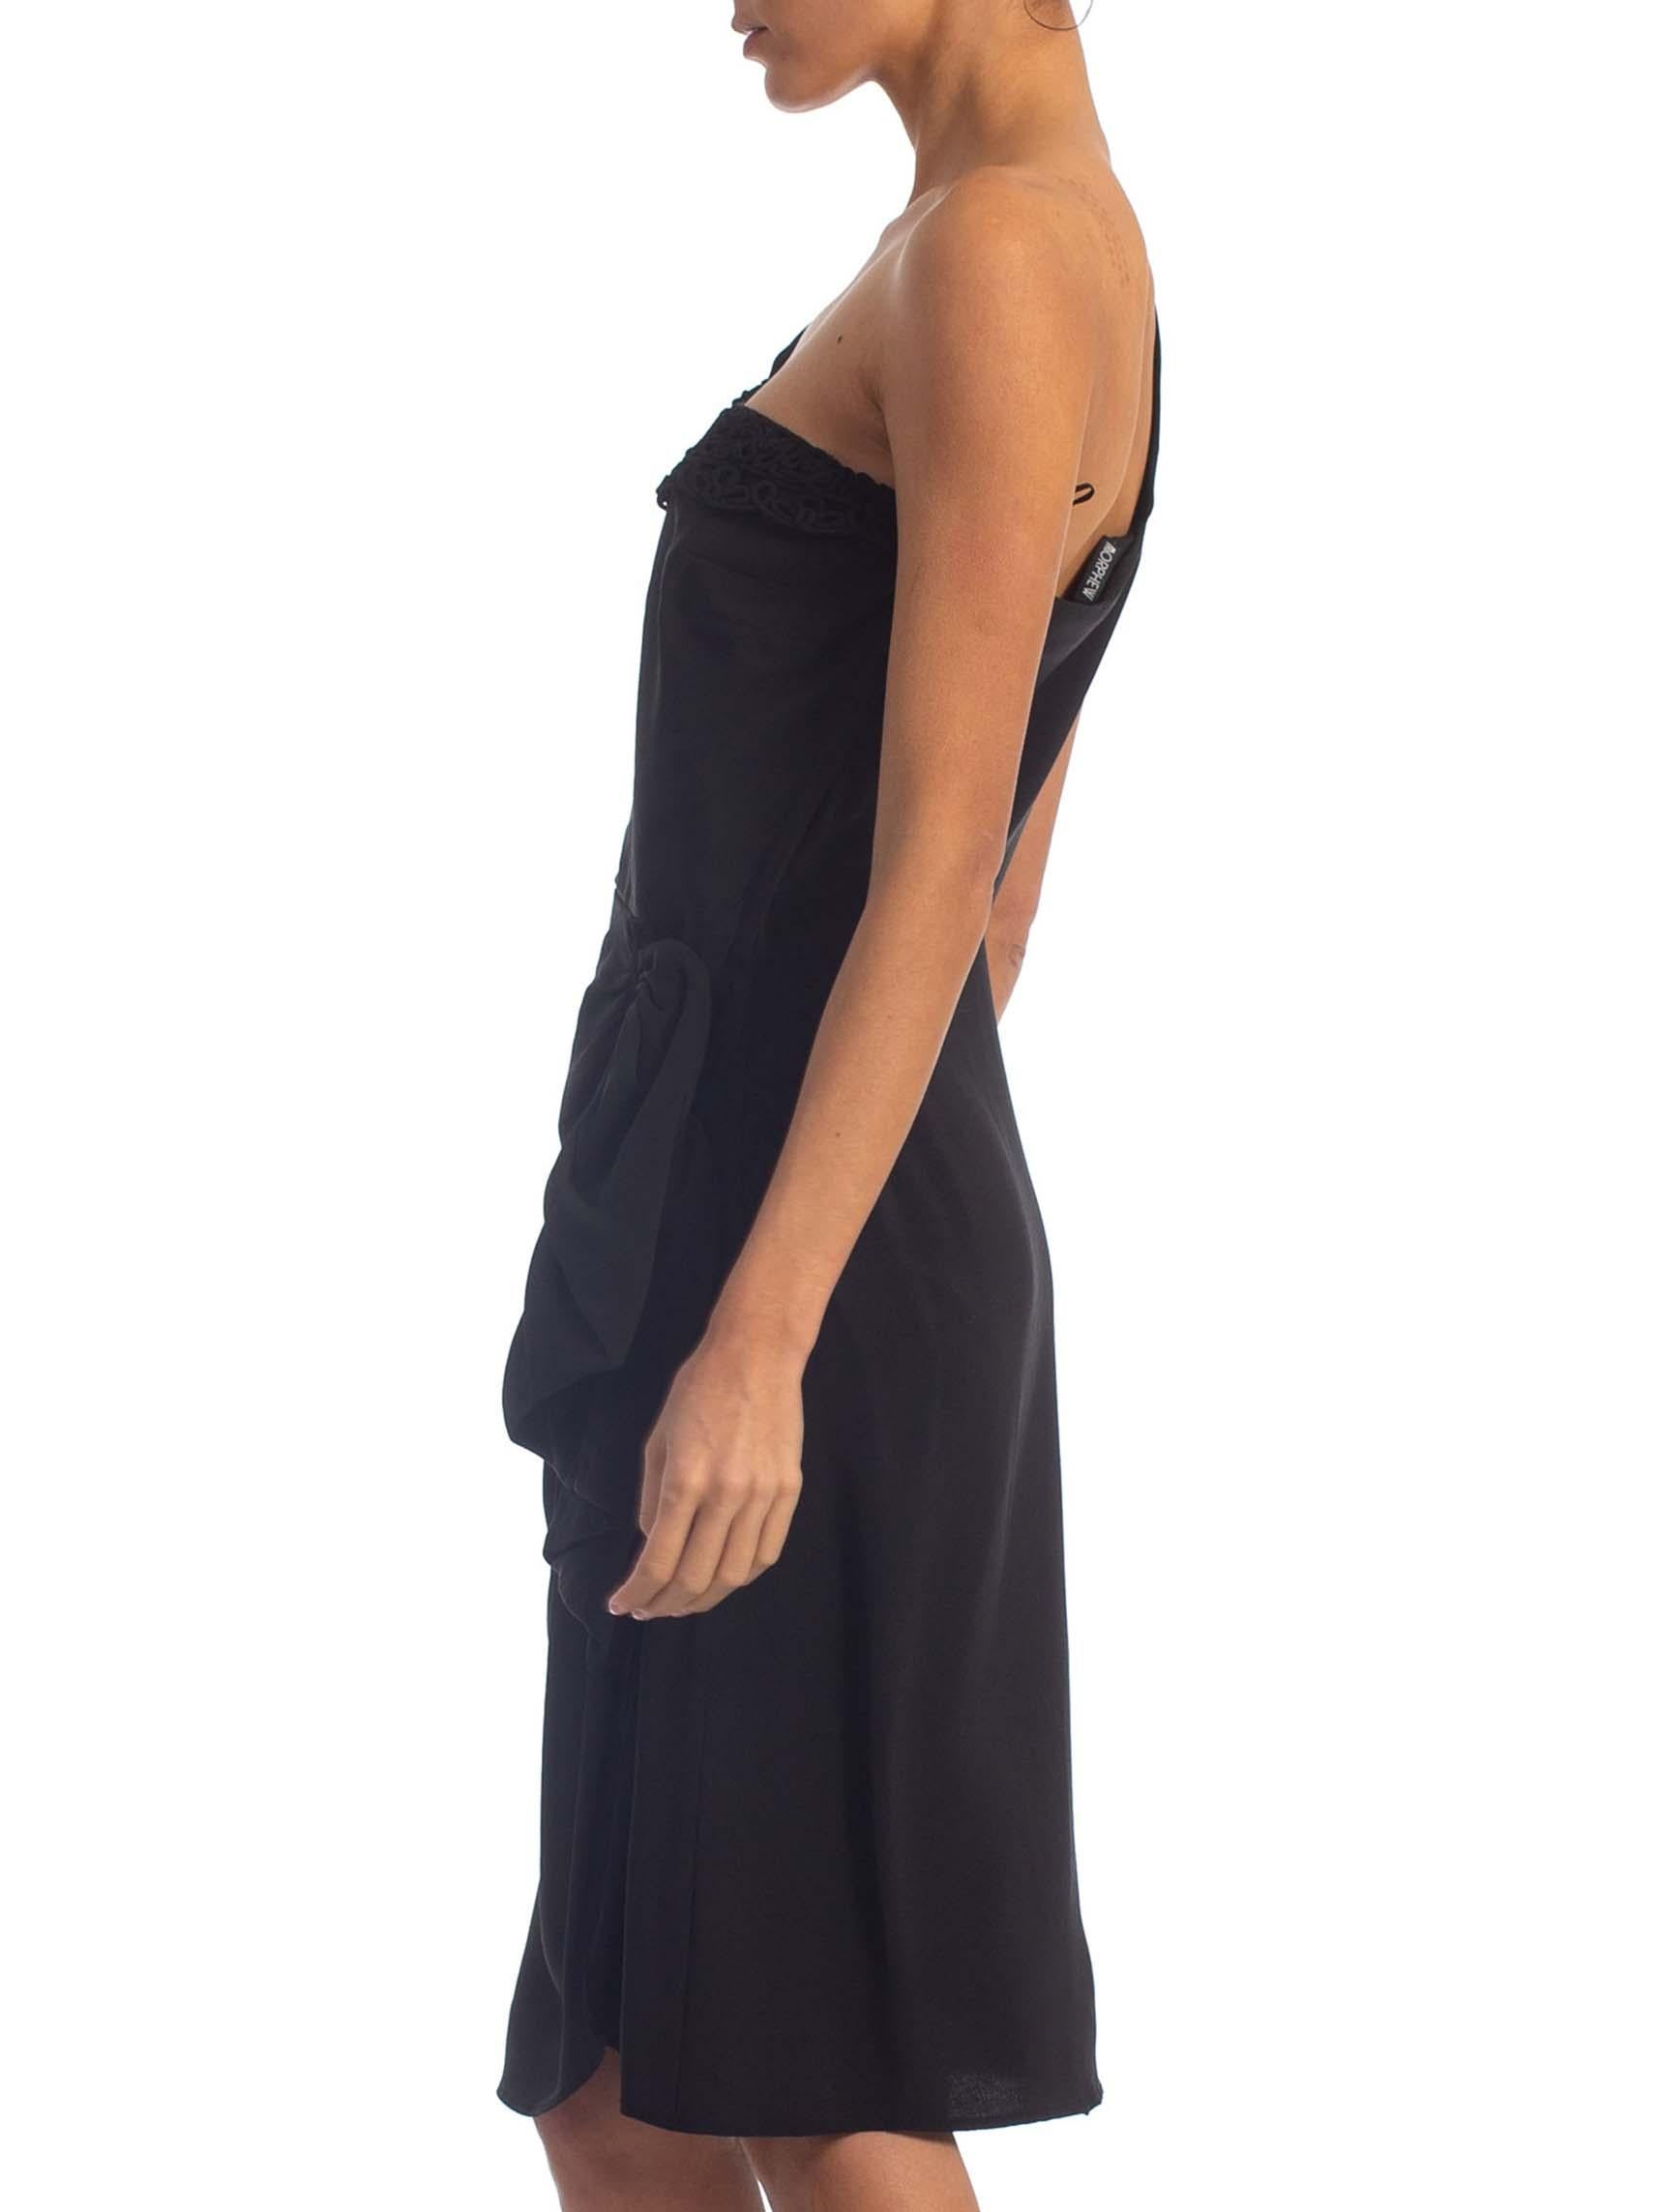 1940'S Black Rayon Crepe One Shoulder Draped Peplum Cocktail Dress For Sale 3